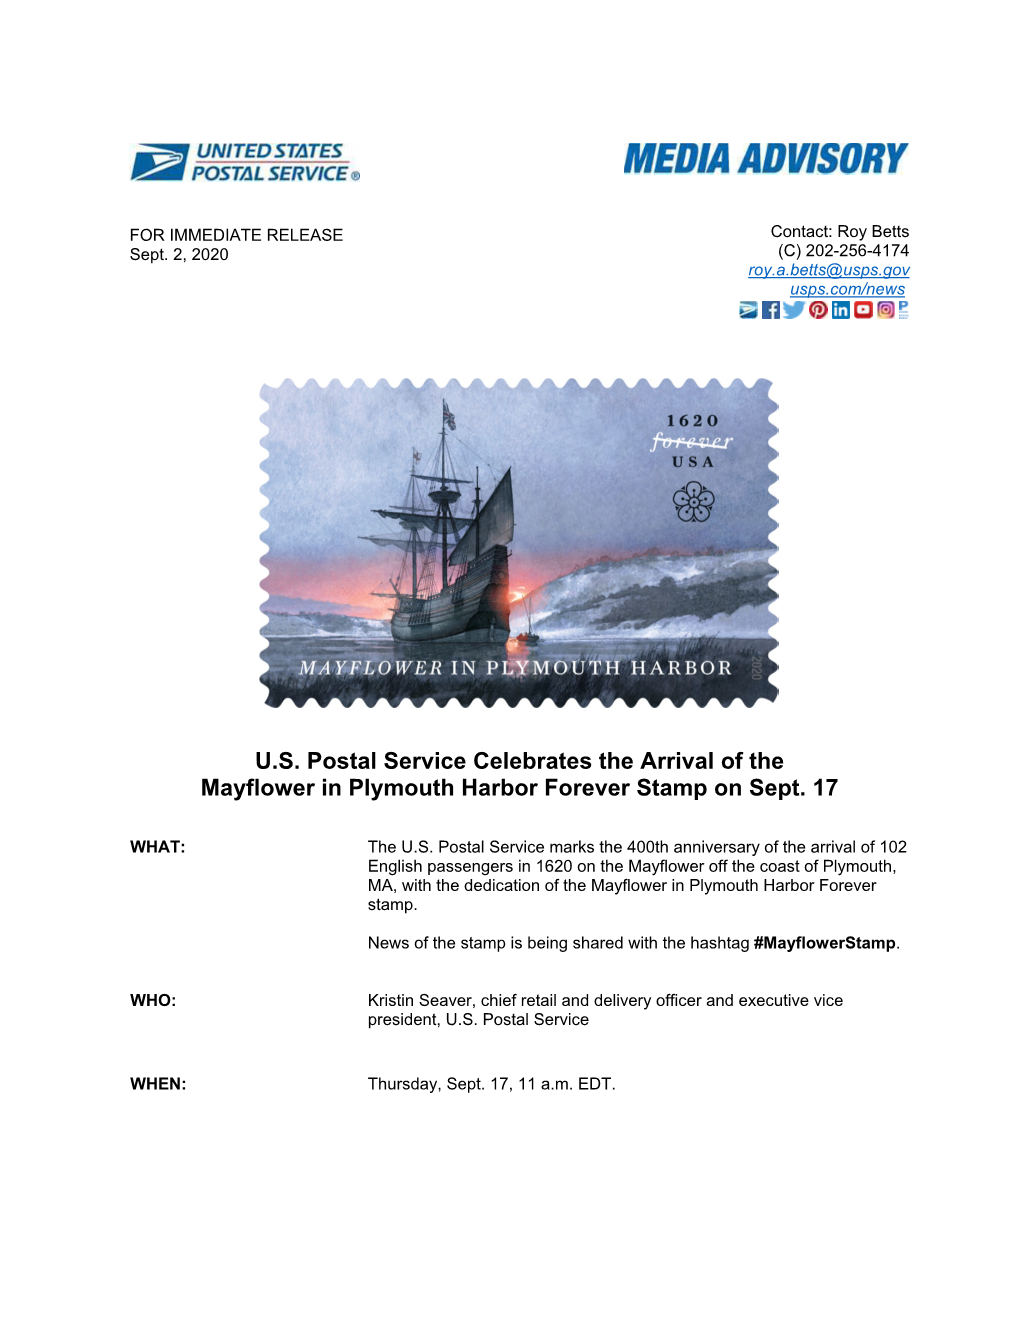 U.S. Postal Service Celebrates the Arrival of the Mayflower in Plymouth Harbor Forever Stamp on Sept